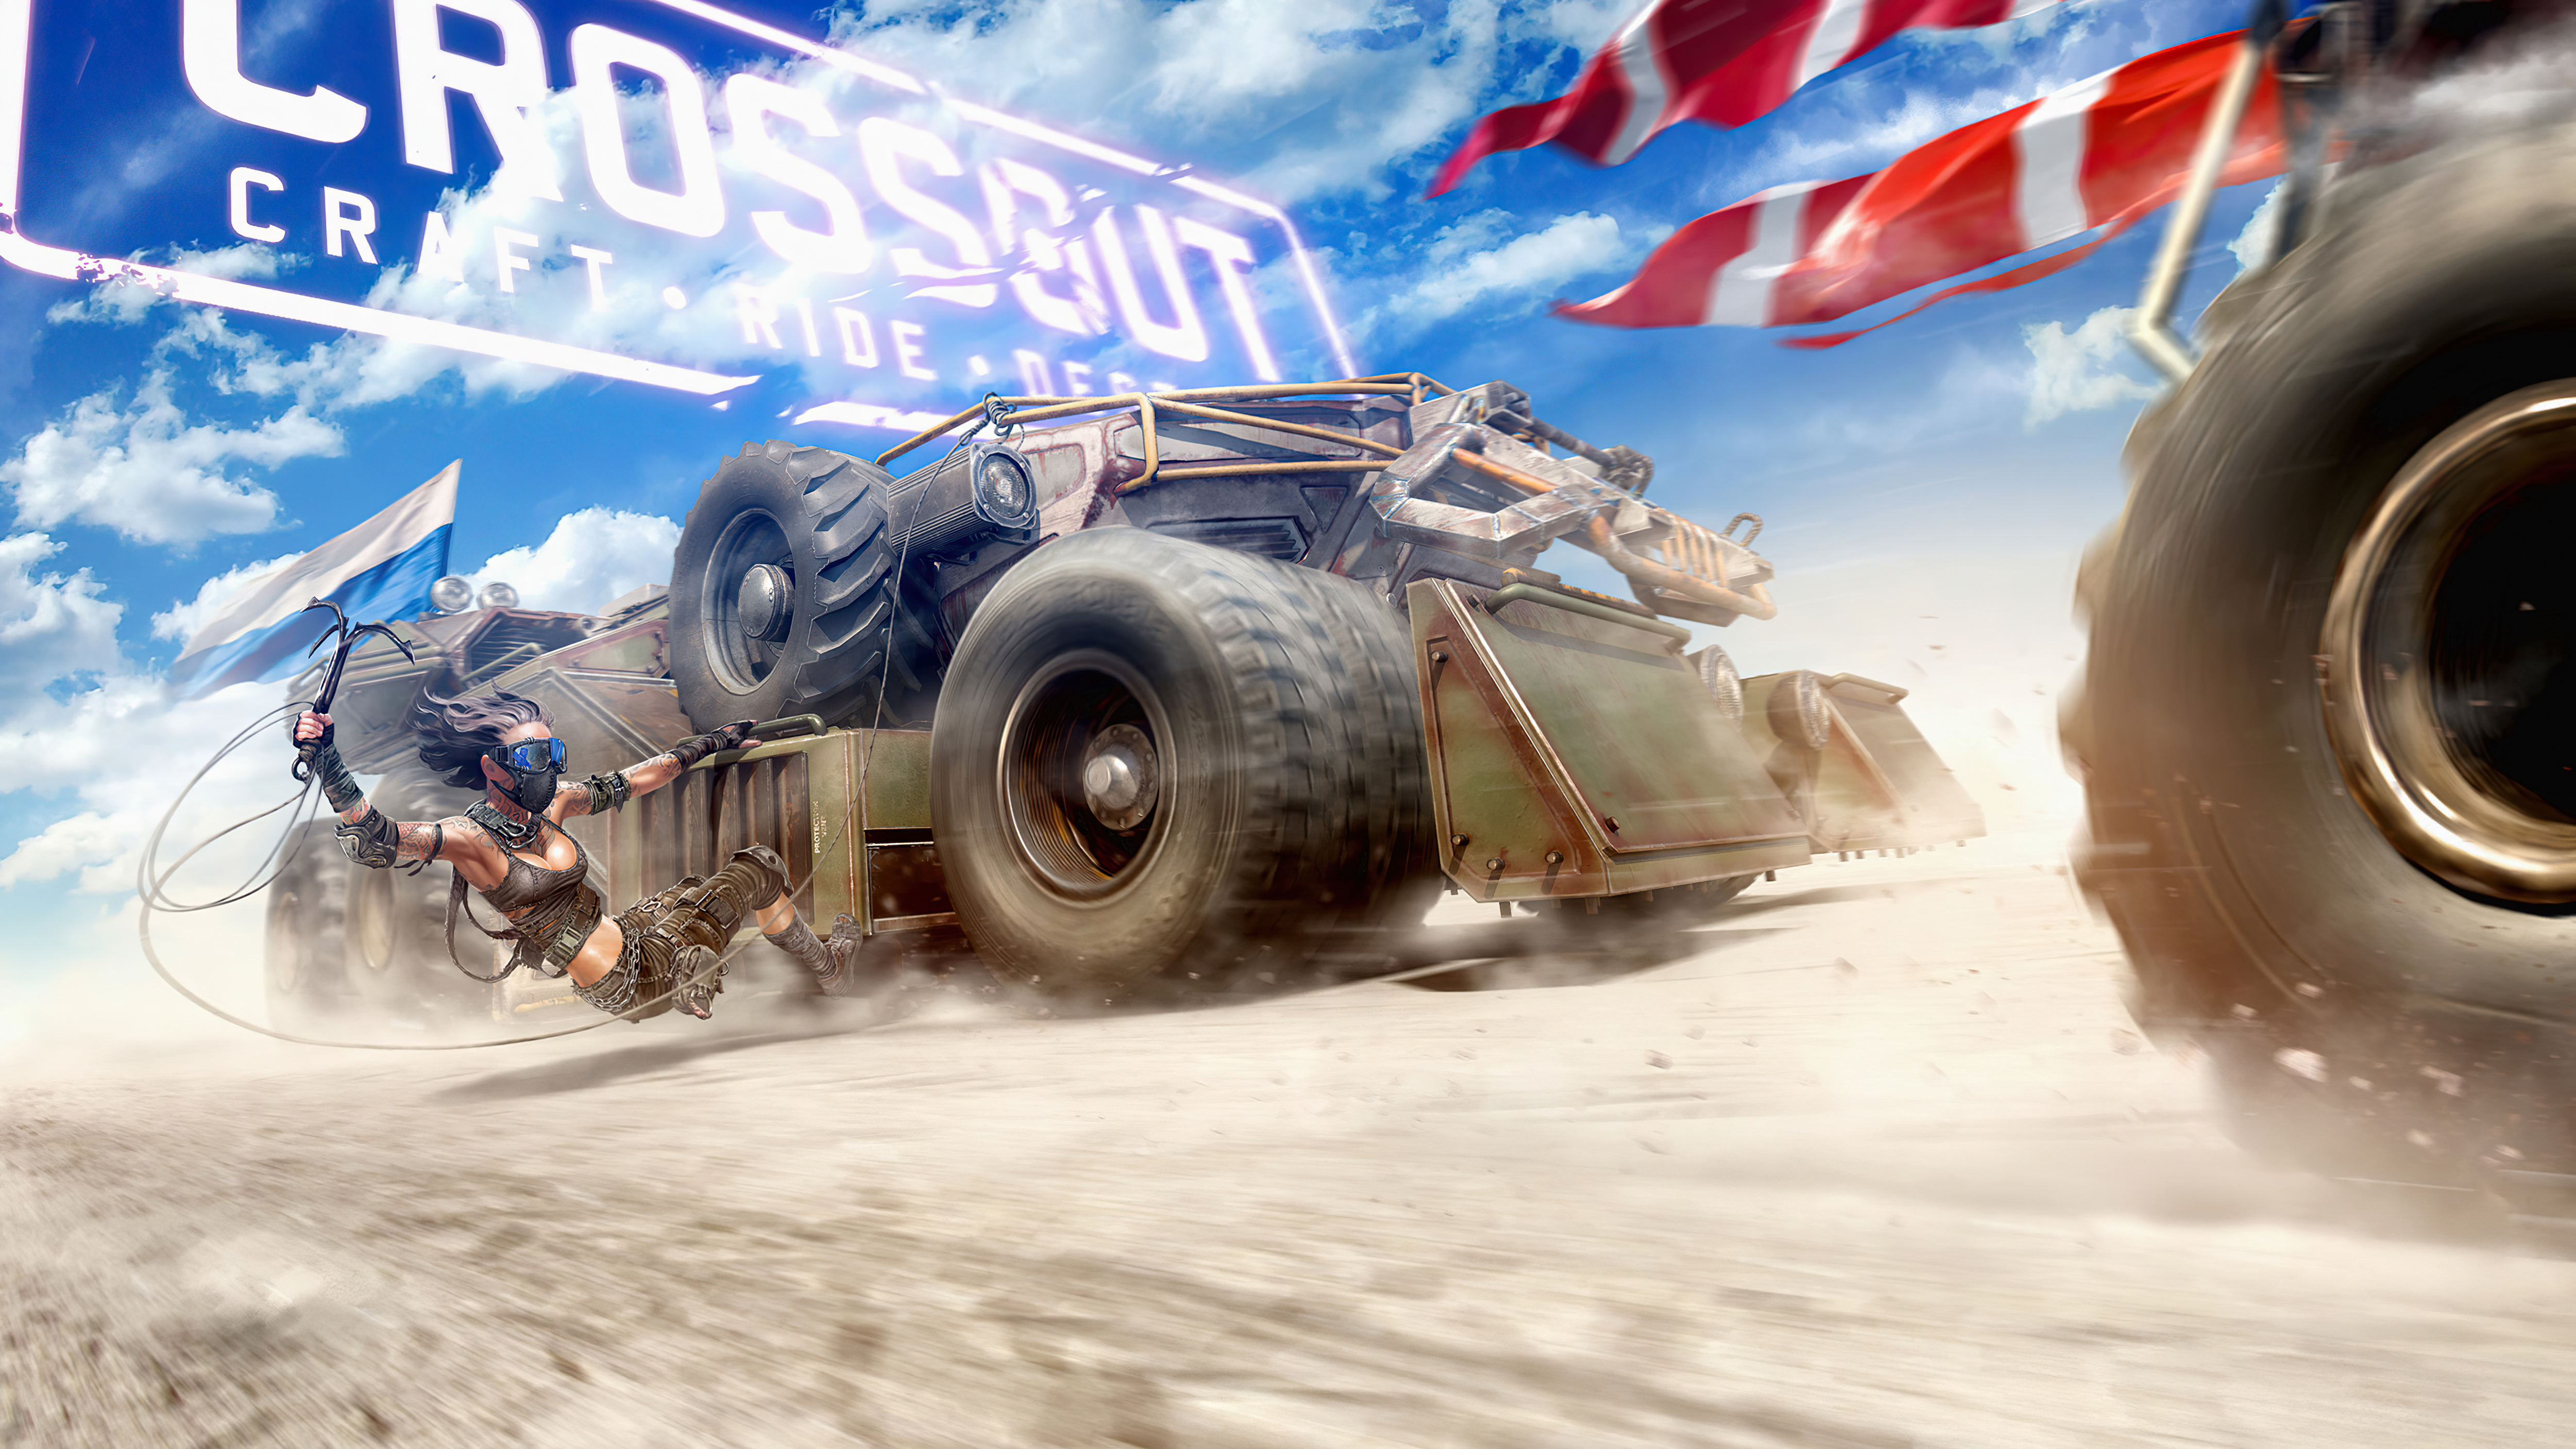 Video Game Crossout 5000x2812